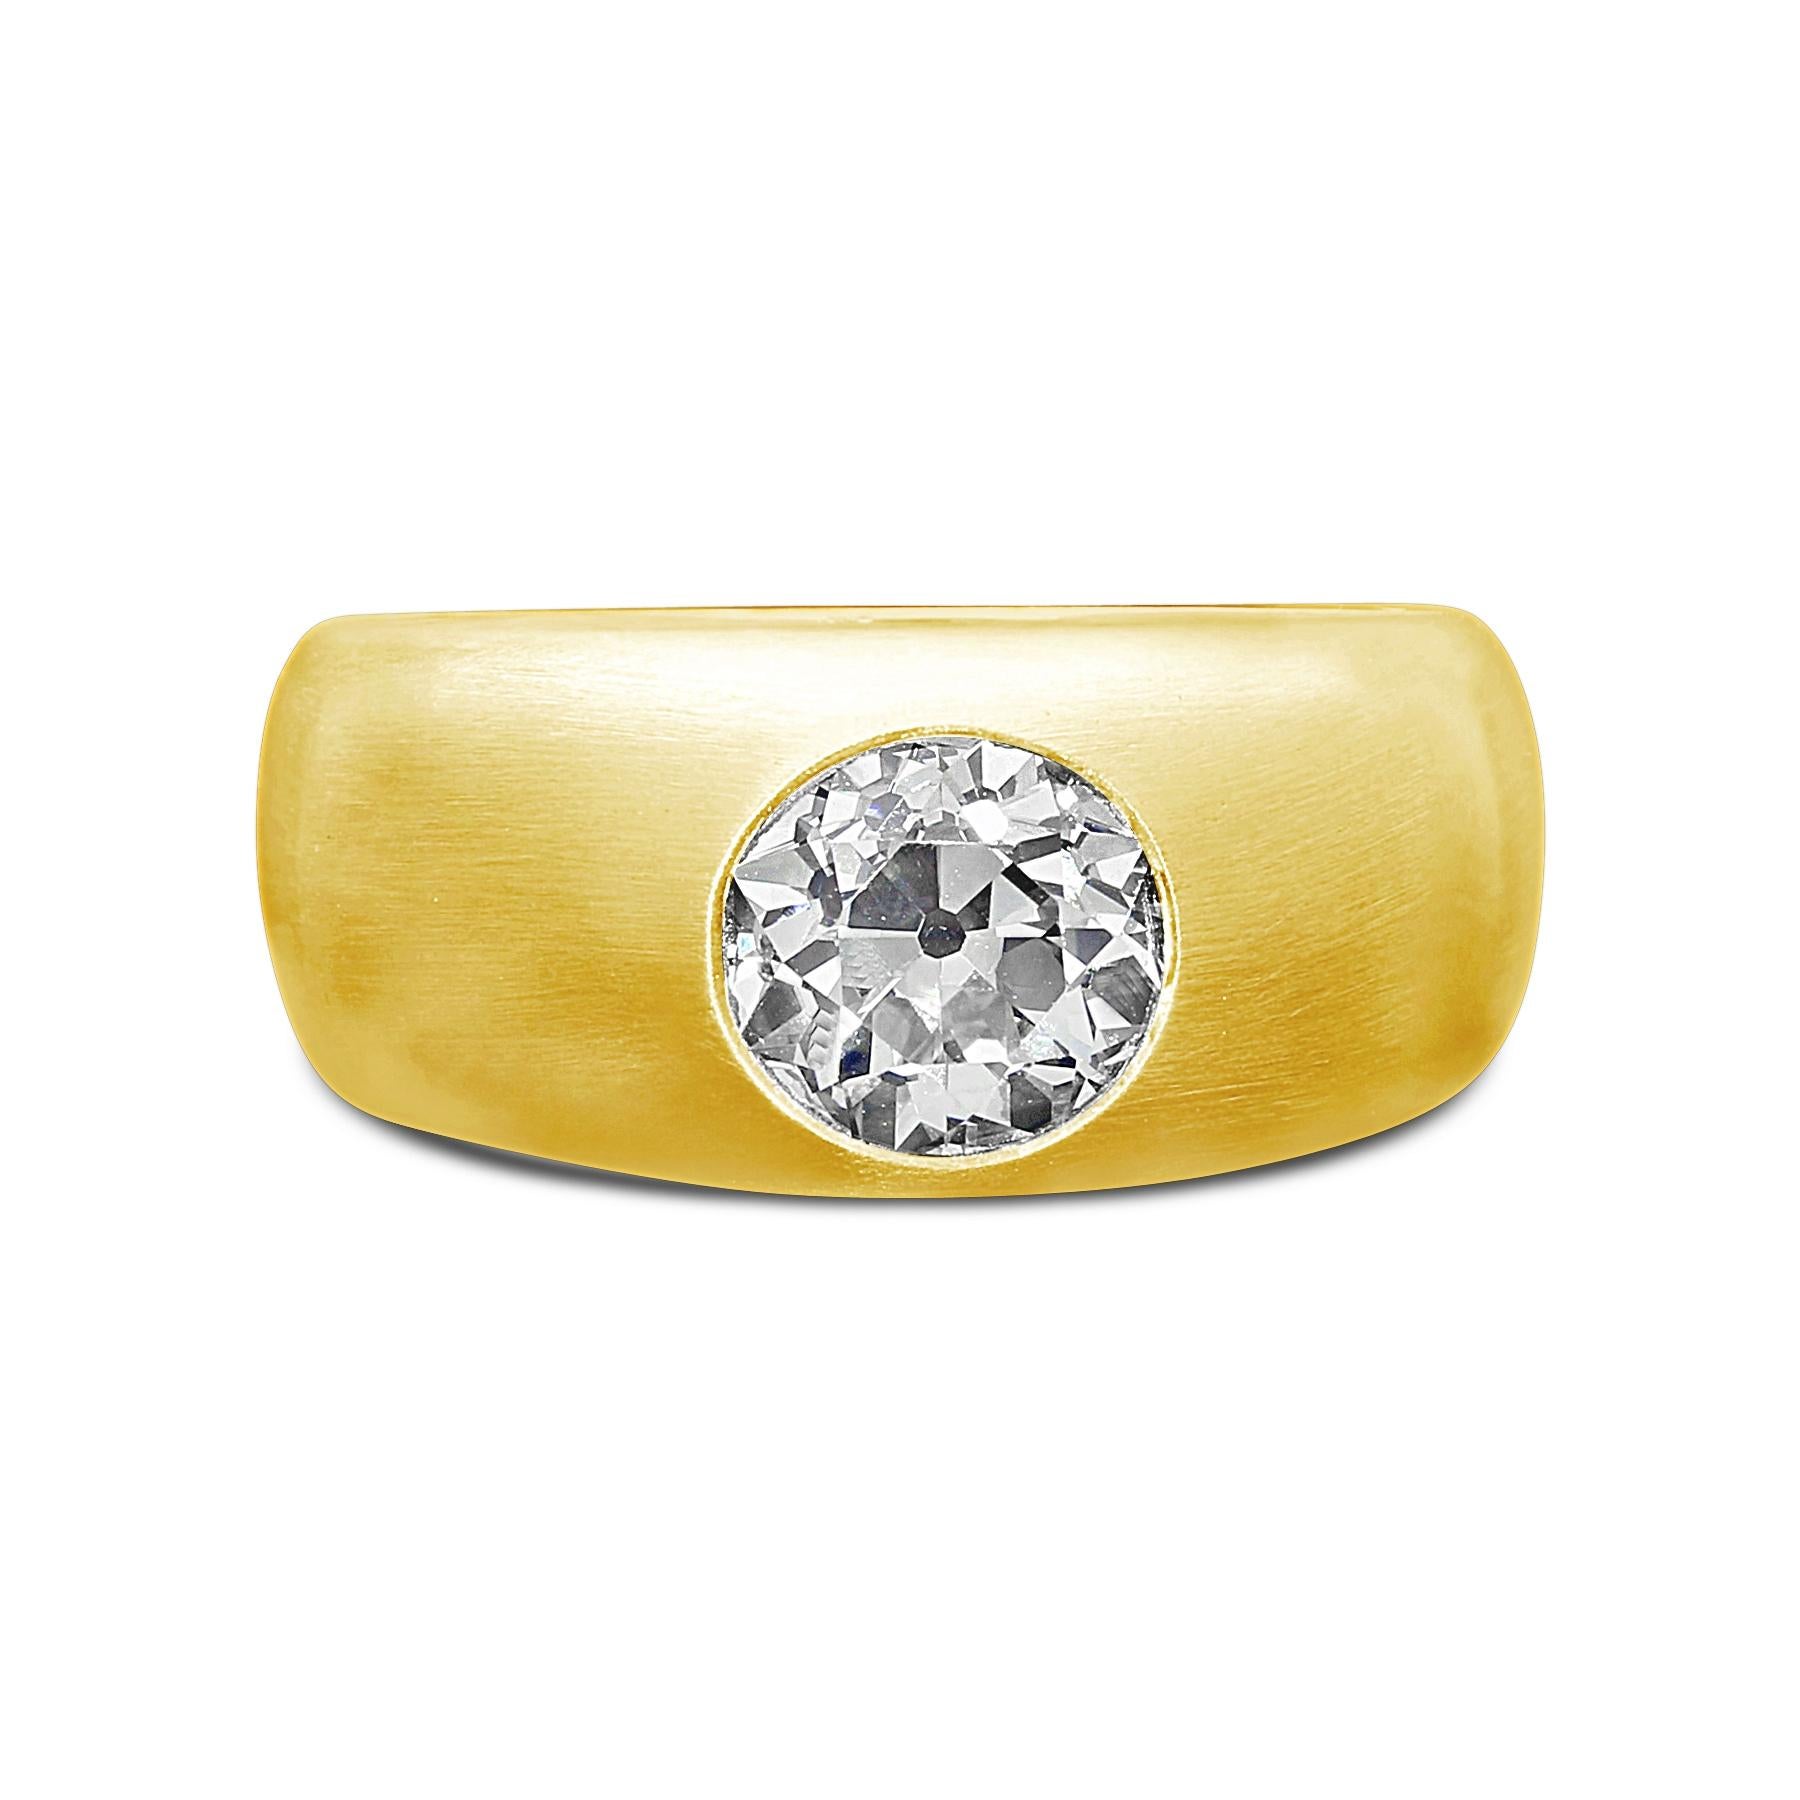 1.65ct Q-R SI2 Old European brilliant cut diamond with GIA certificate 
22ct yellow gold with maker's marks and London assay marks
UK finger size M, US size 6.5, can be adjusted to your own finger size
11.7 grams

A striking 22 Carat yellow gold and